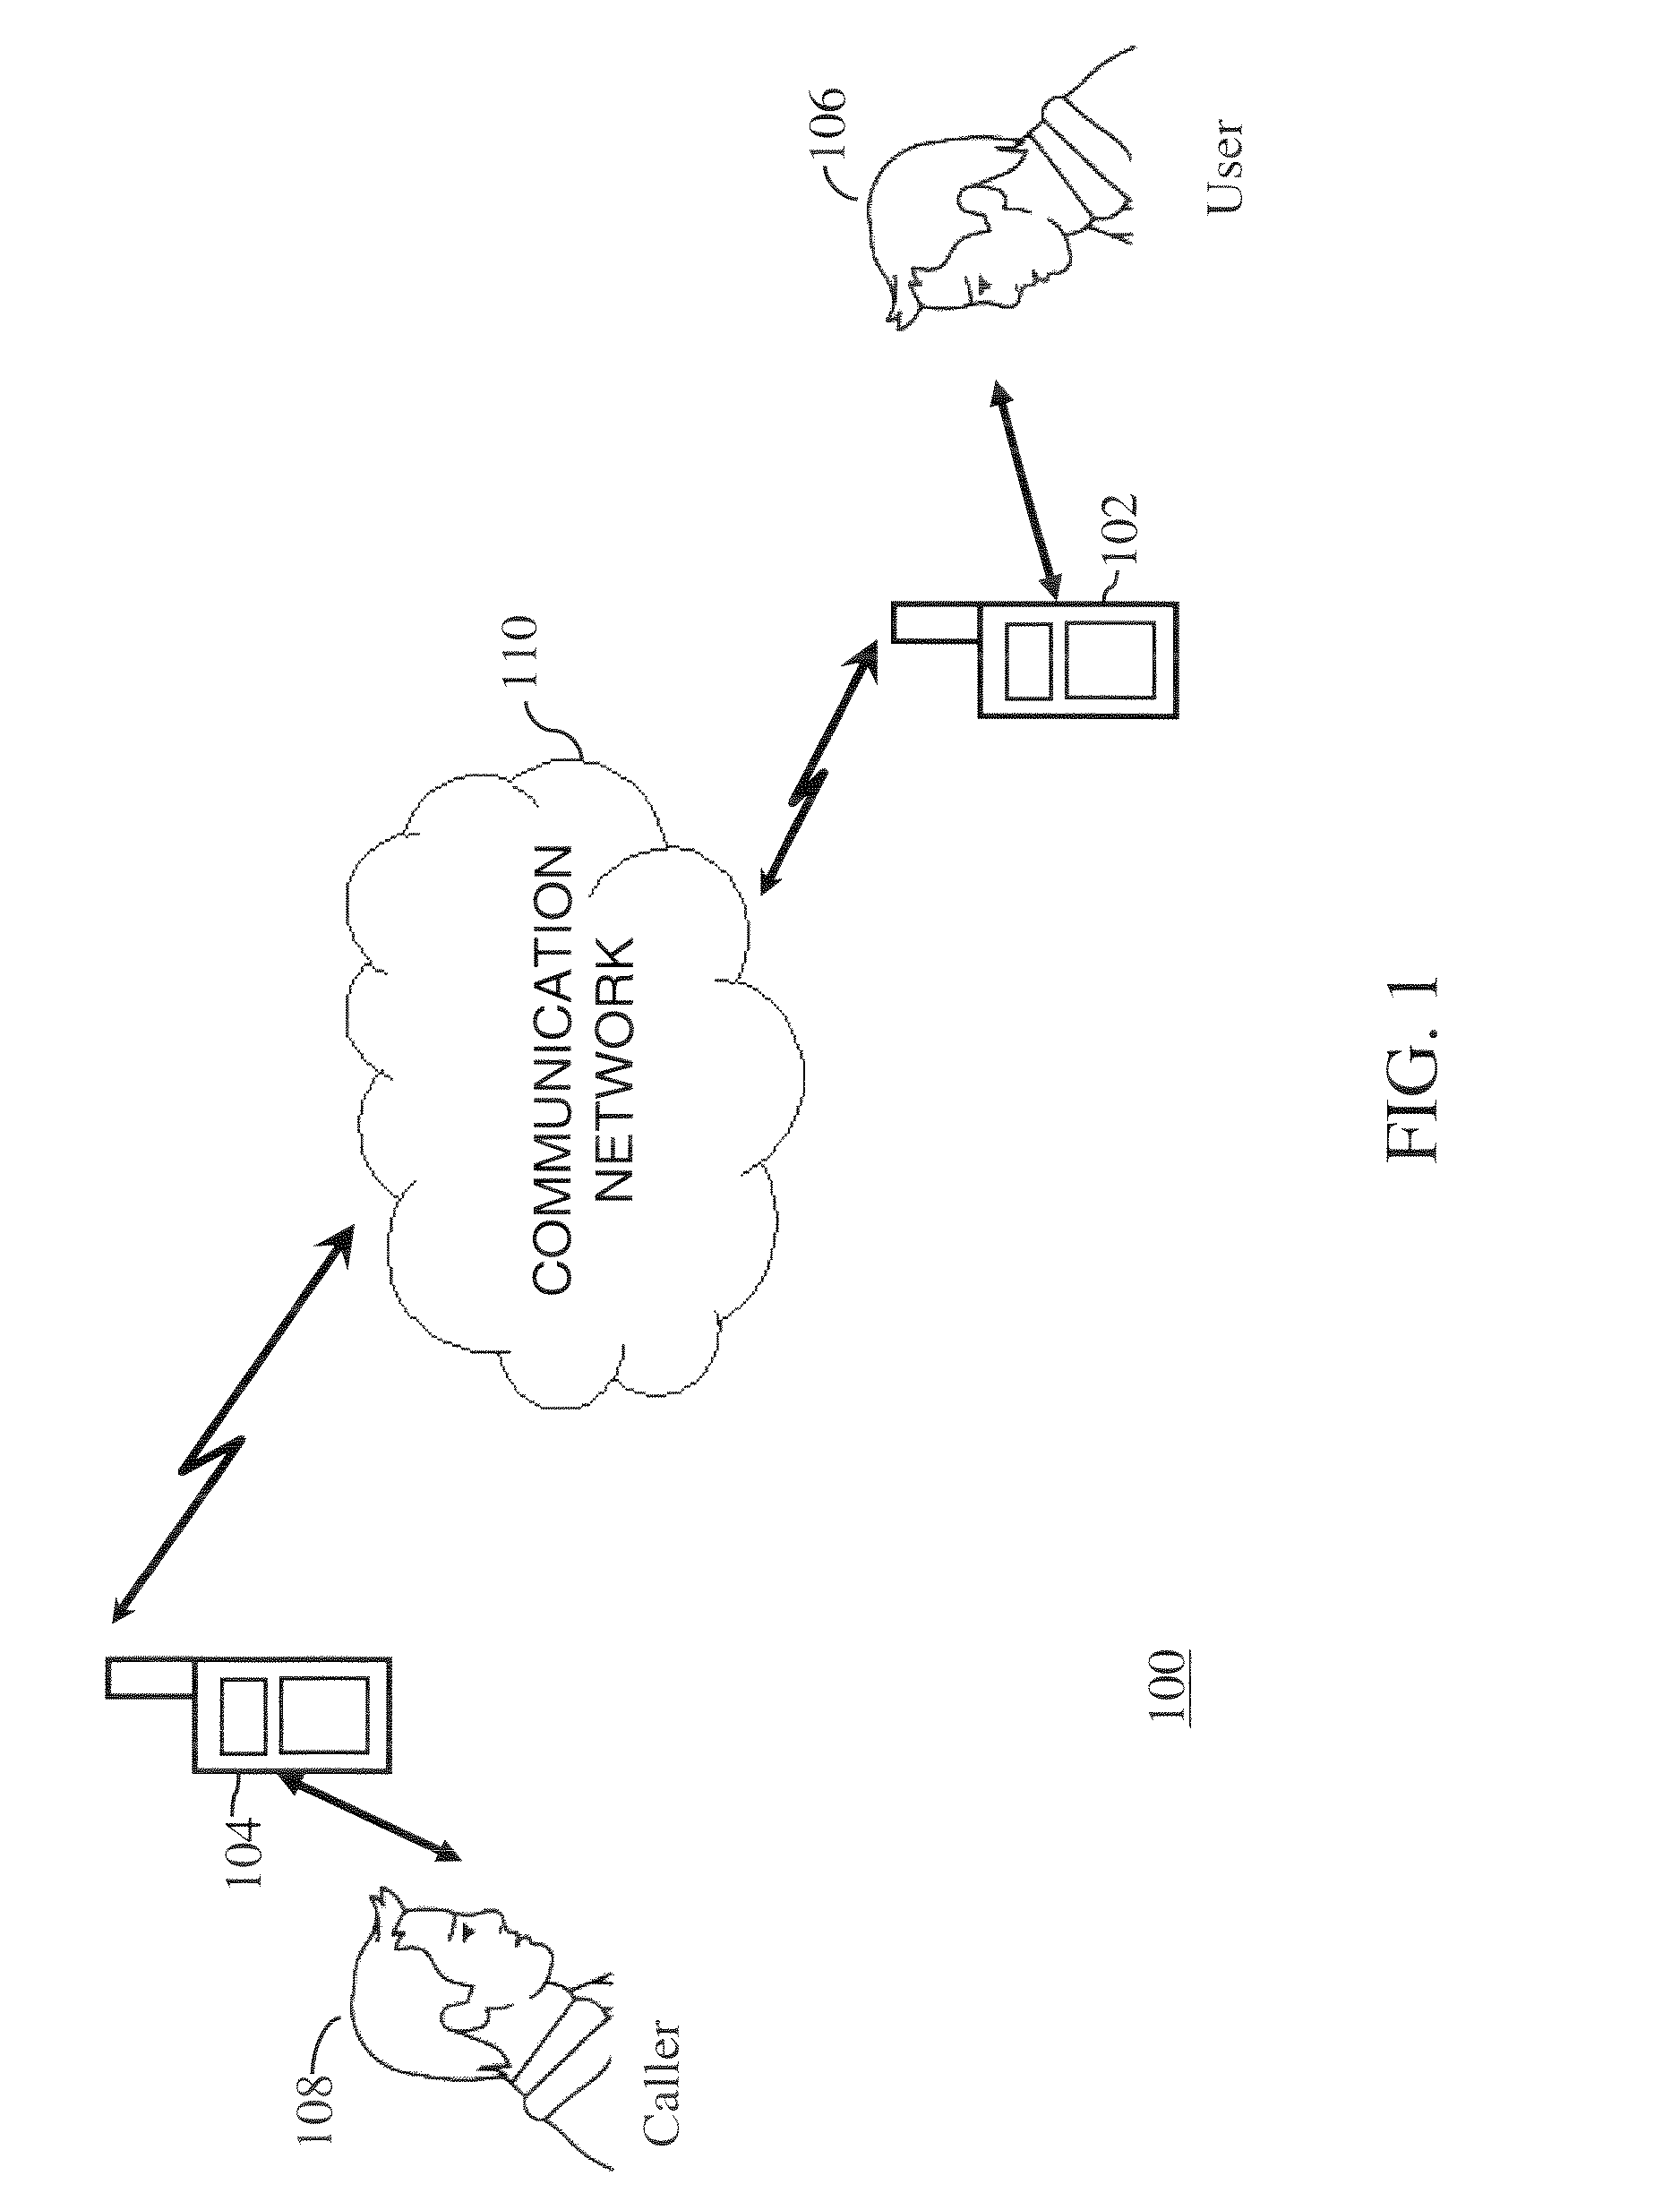 Method and communication unit for inidicating urgency of a communication